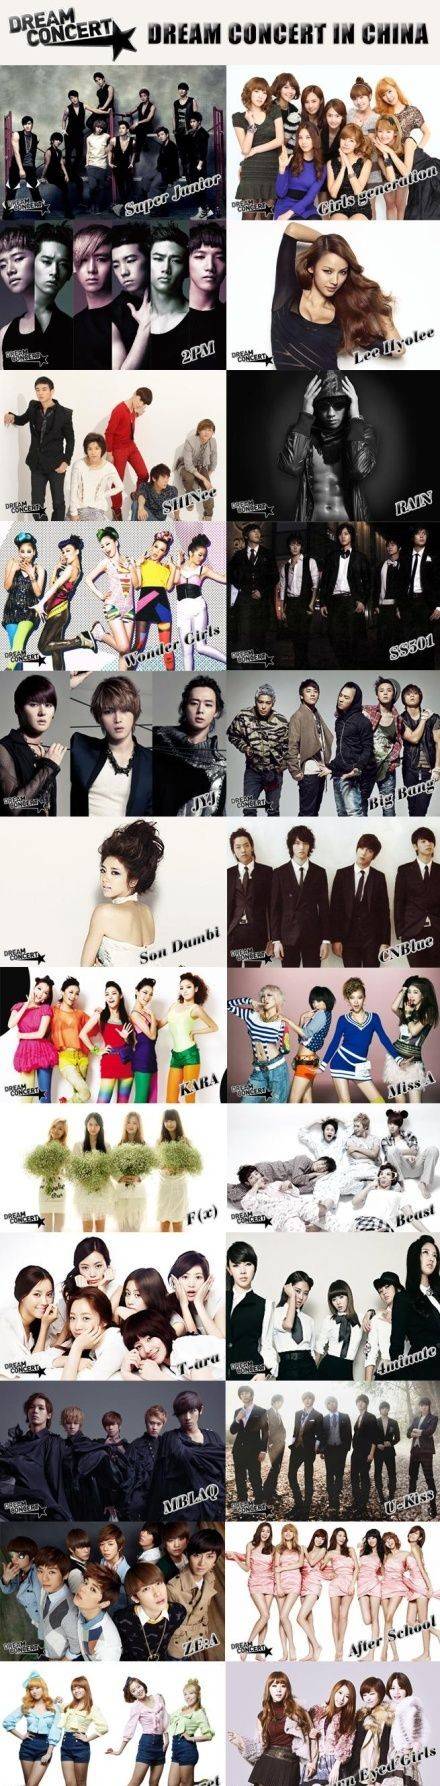 DREAM CONCERT 2011 In China | ♥ SJ Couples